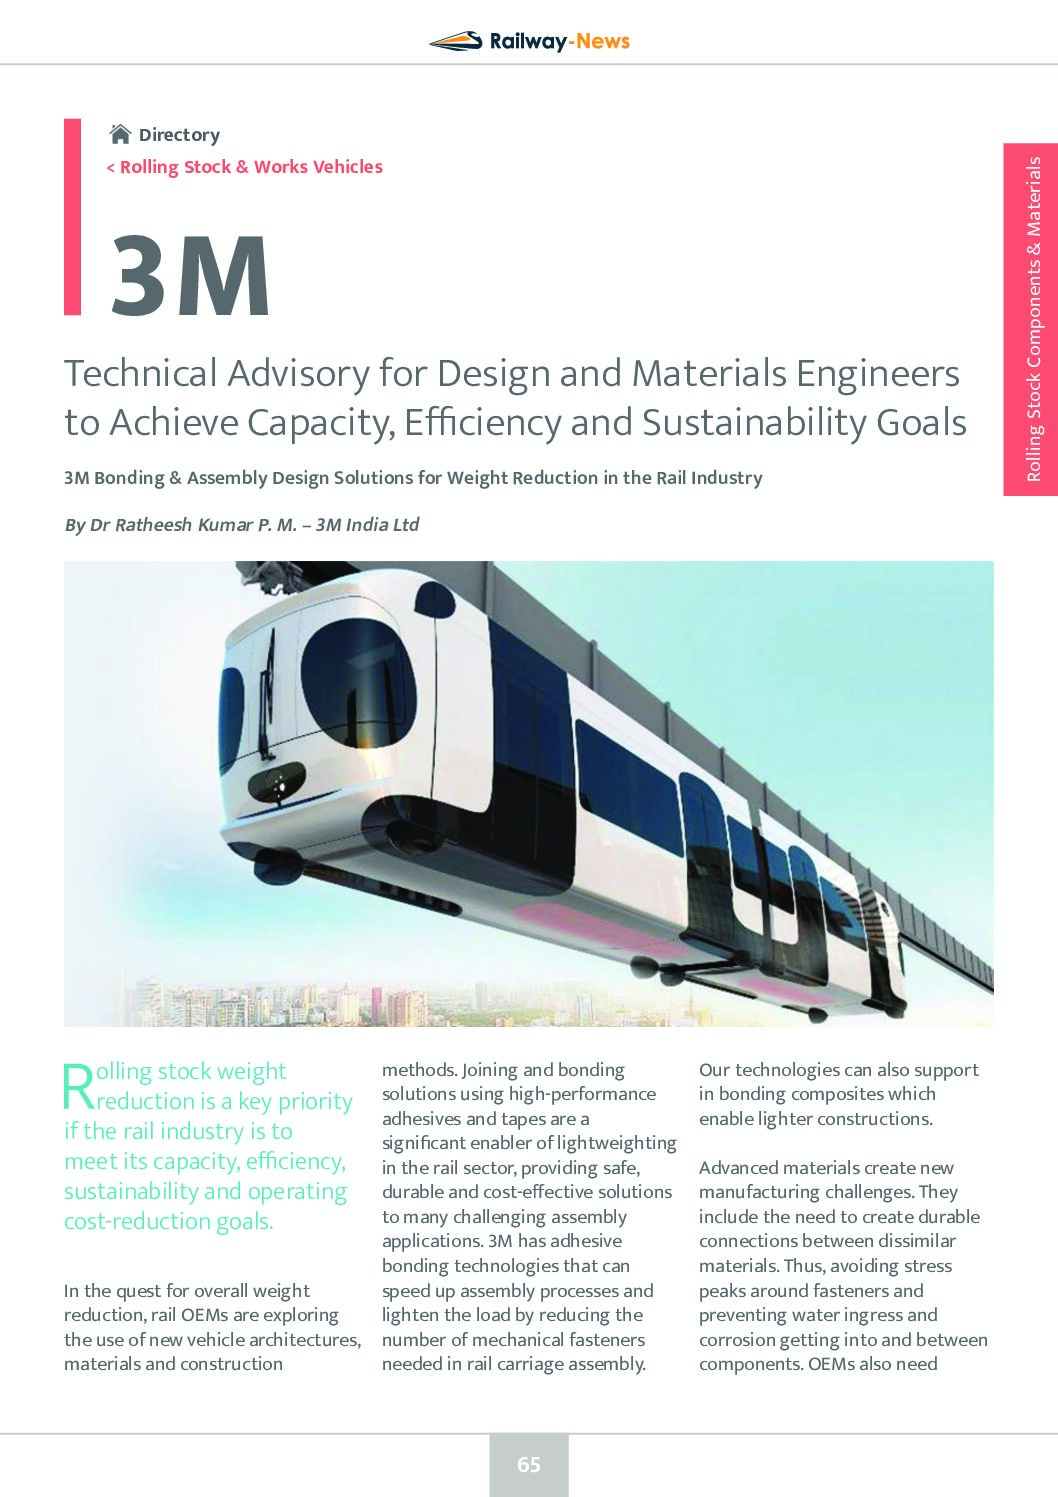 Technical Advisory for Design and Materials Engineers to Achieve Capacity, Efficiency and Sustainability Goals